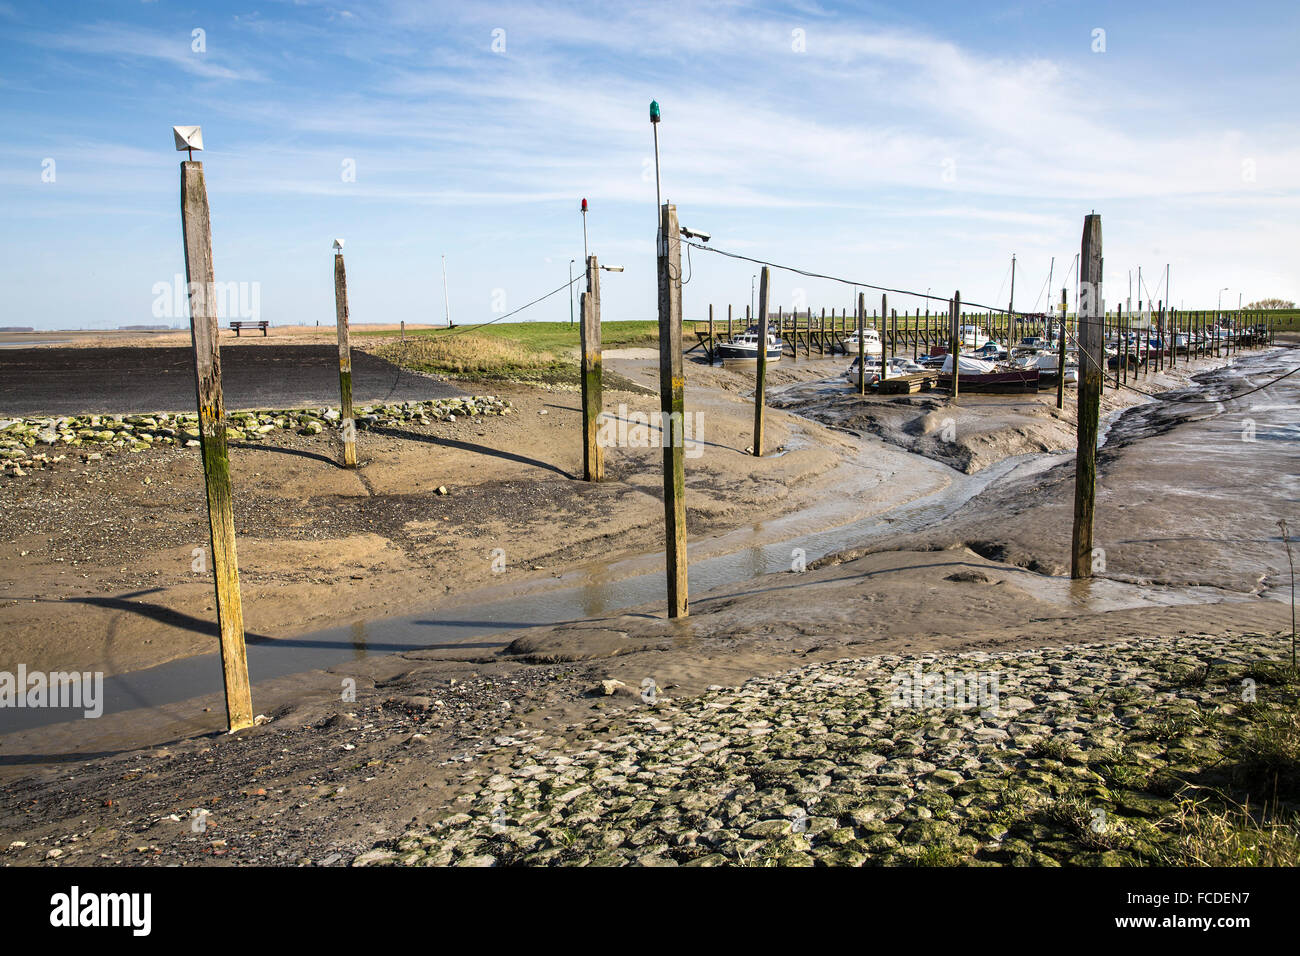 Netherlands, Paal, Westerschelde river. Tidal marshland. Marina at low tide Stock Photo